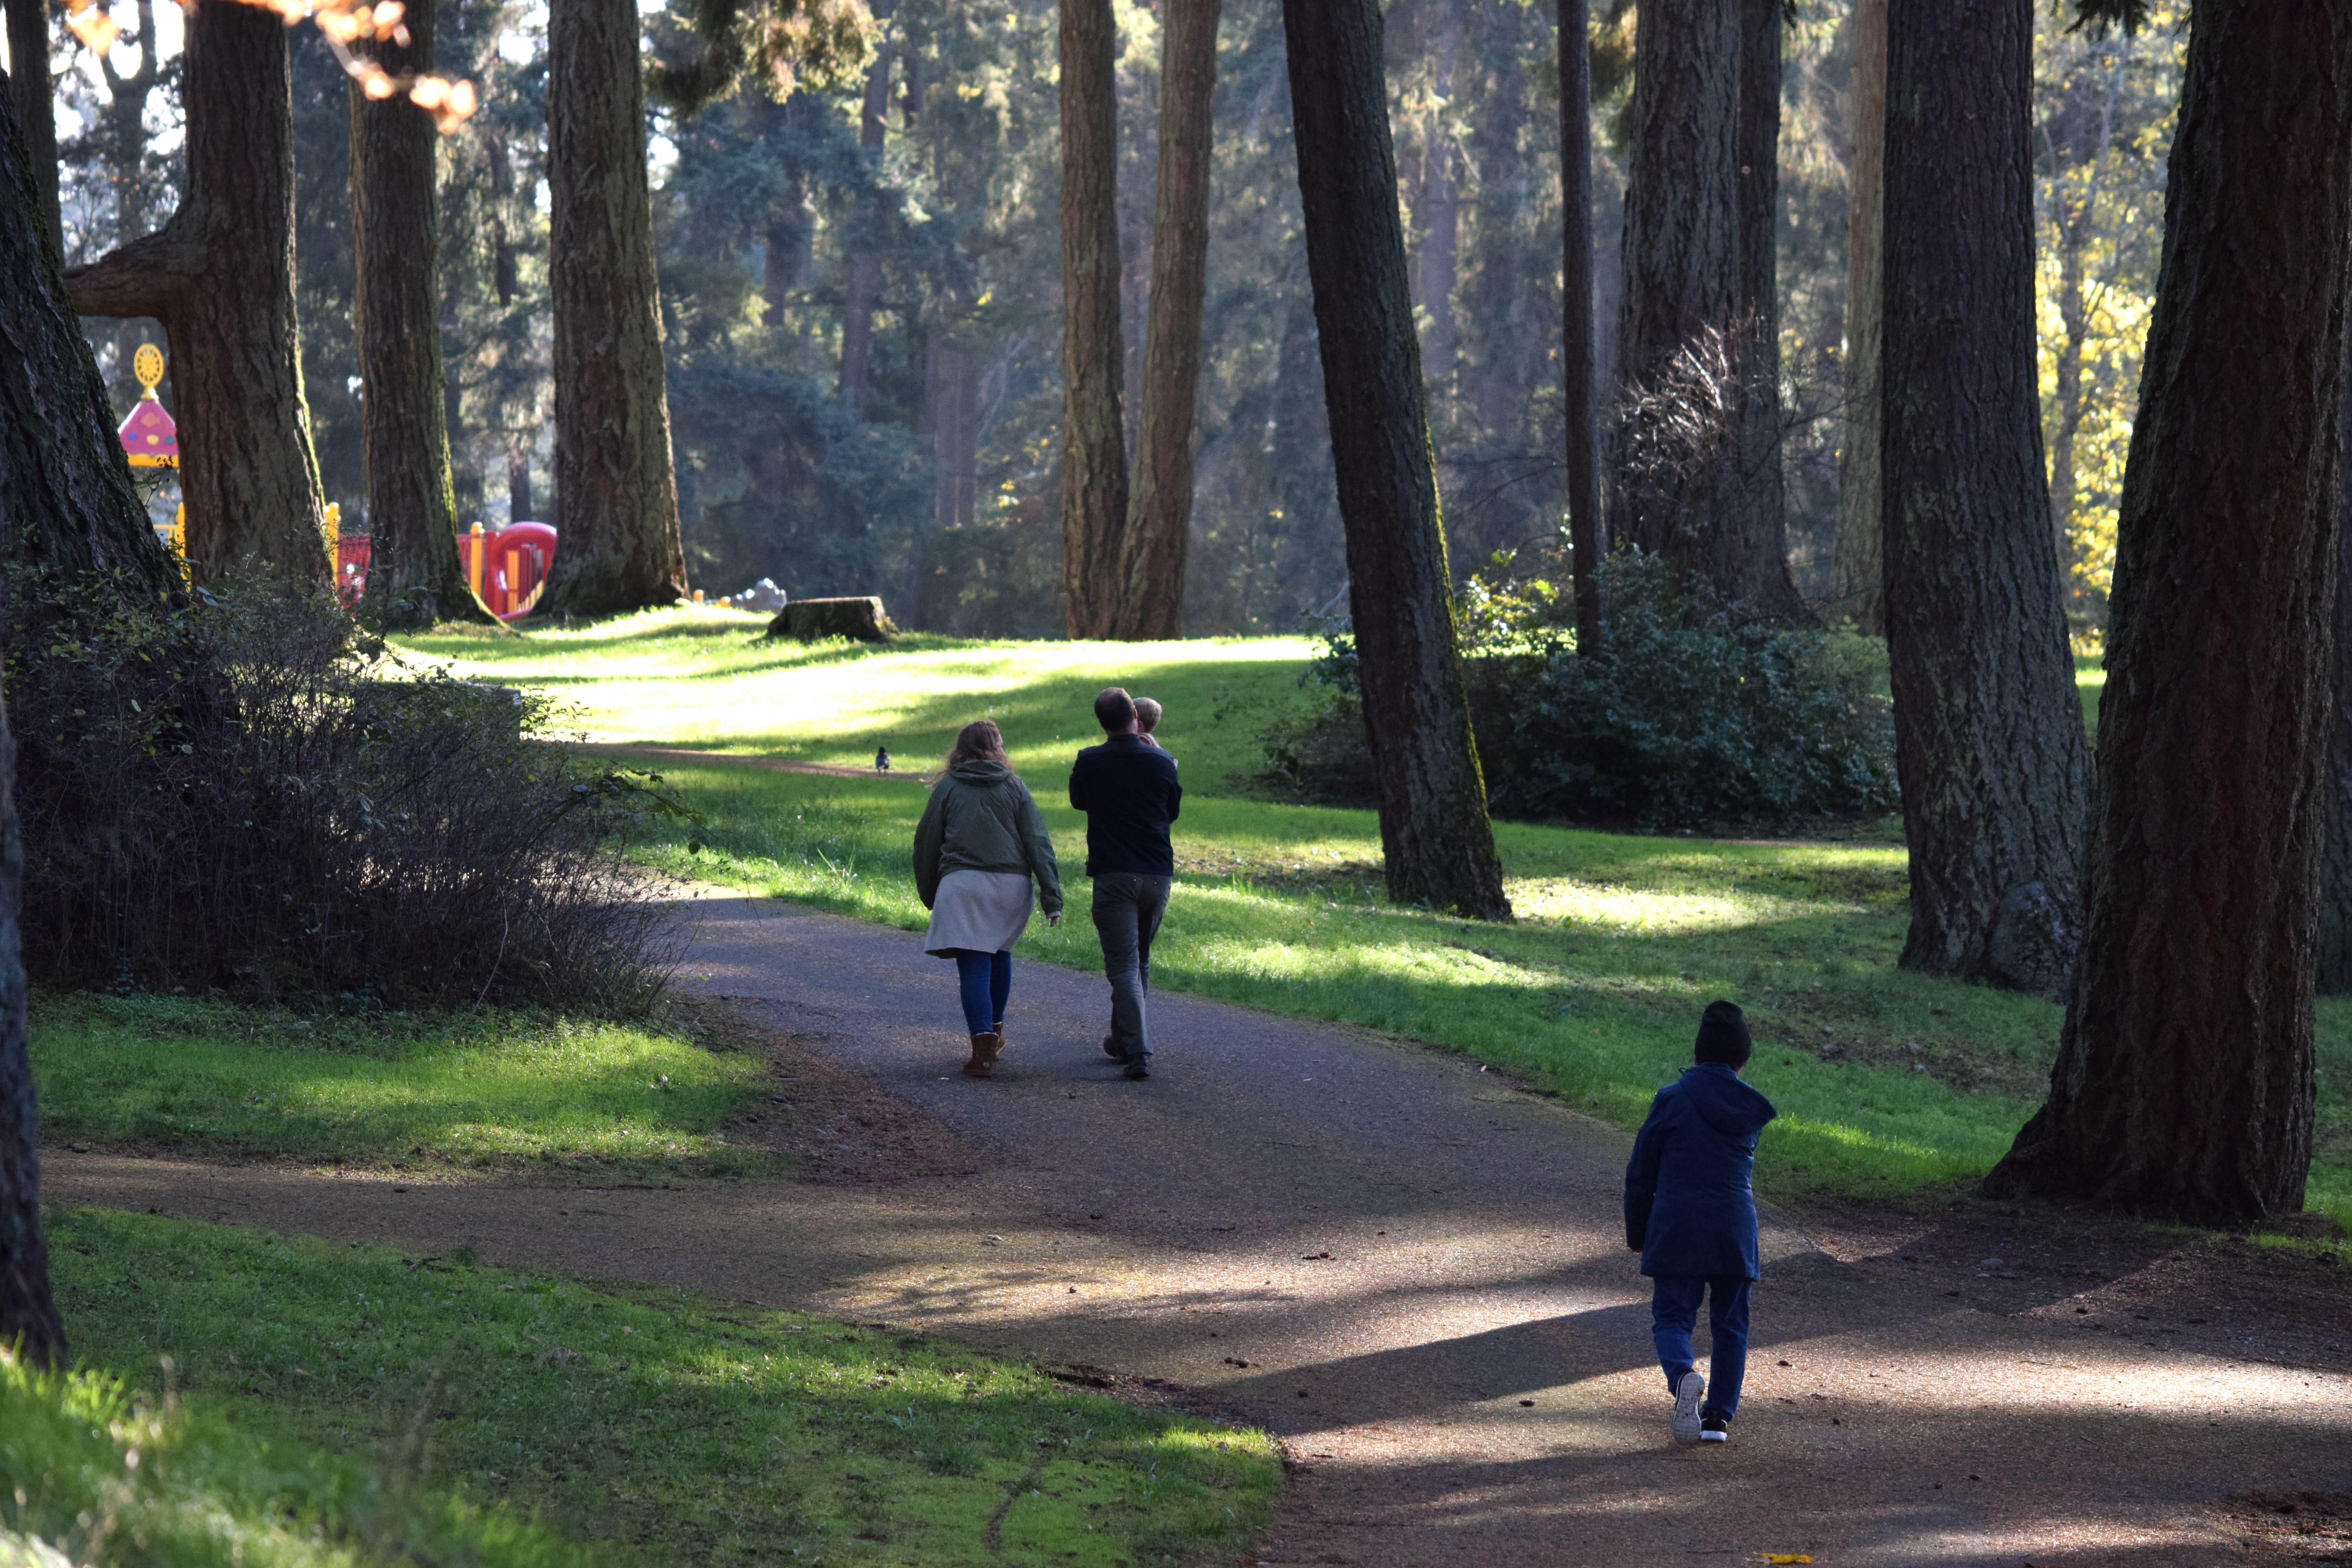 people meandering through a wooded park